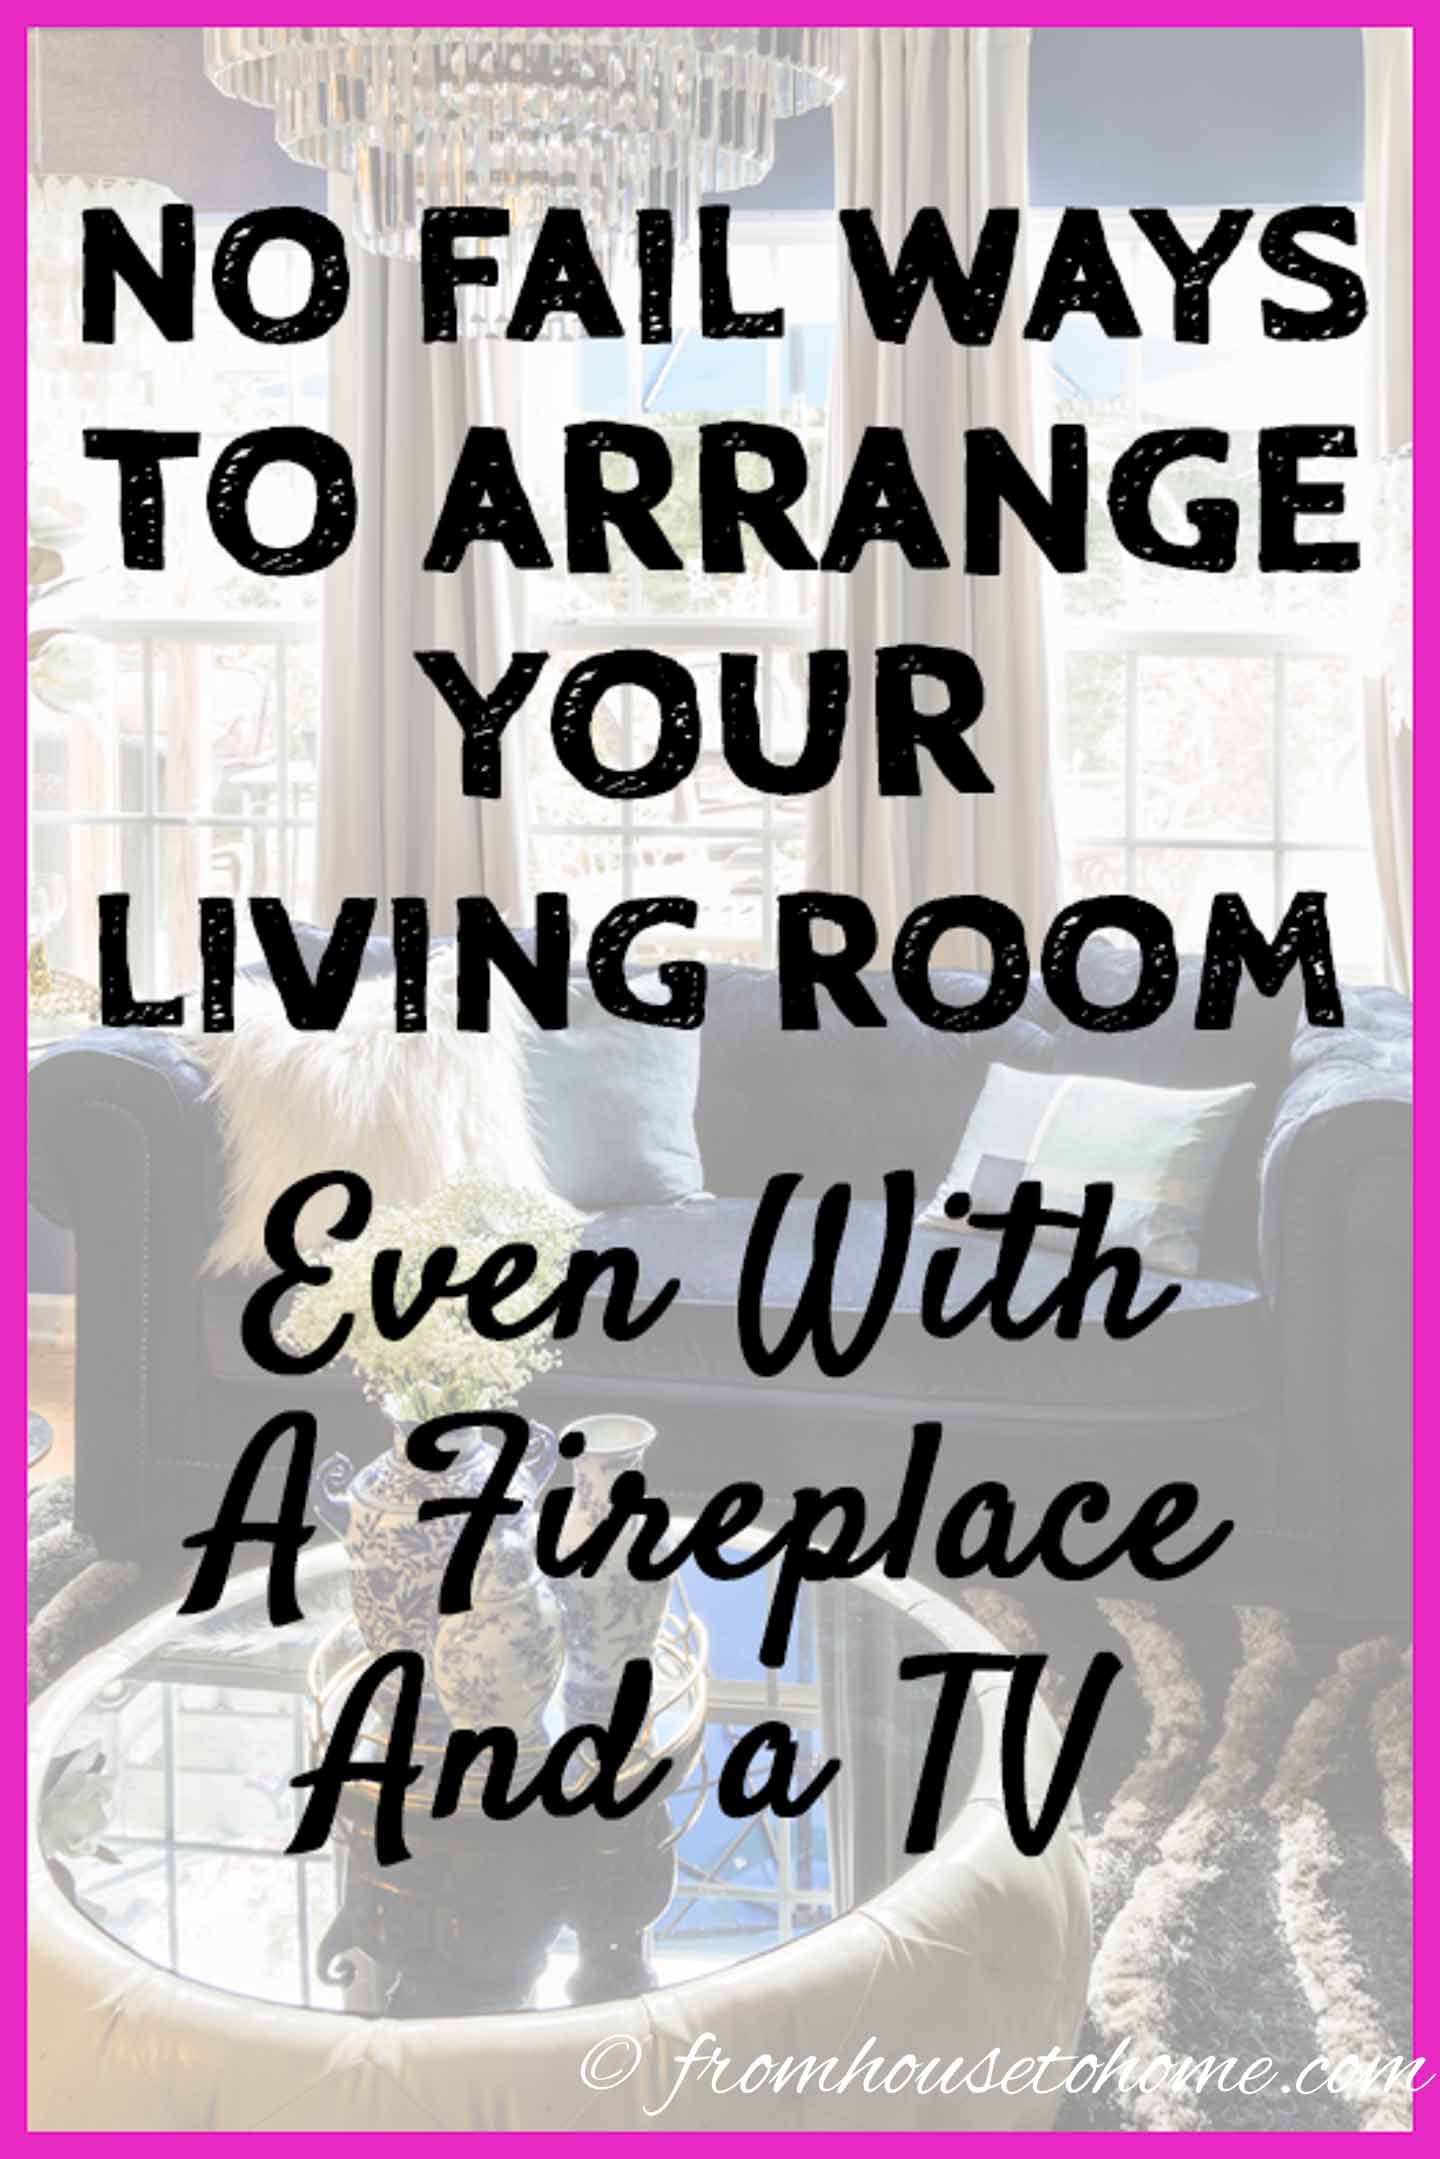 No fail ways to arrange your living room even with a fireplace and a TV